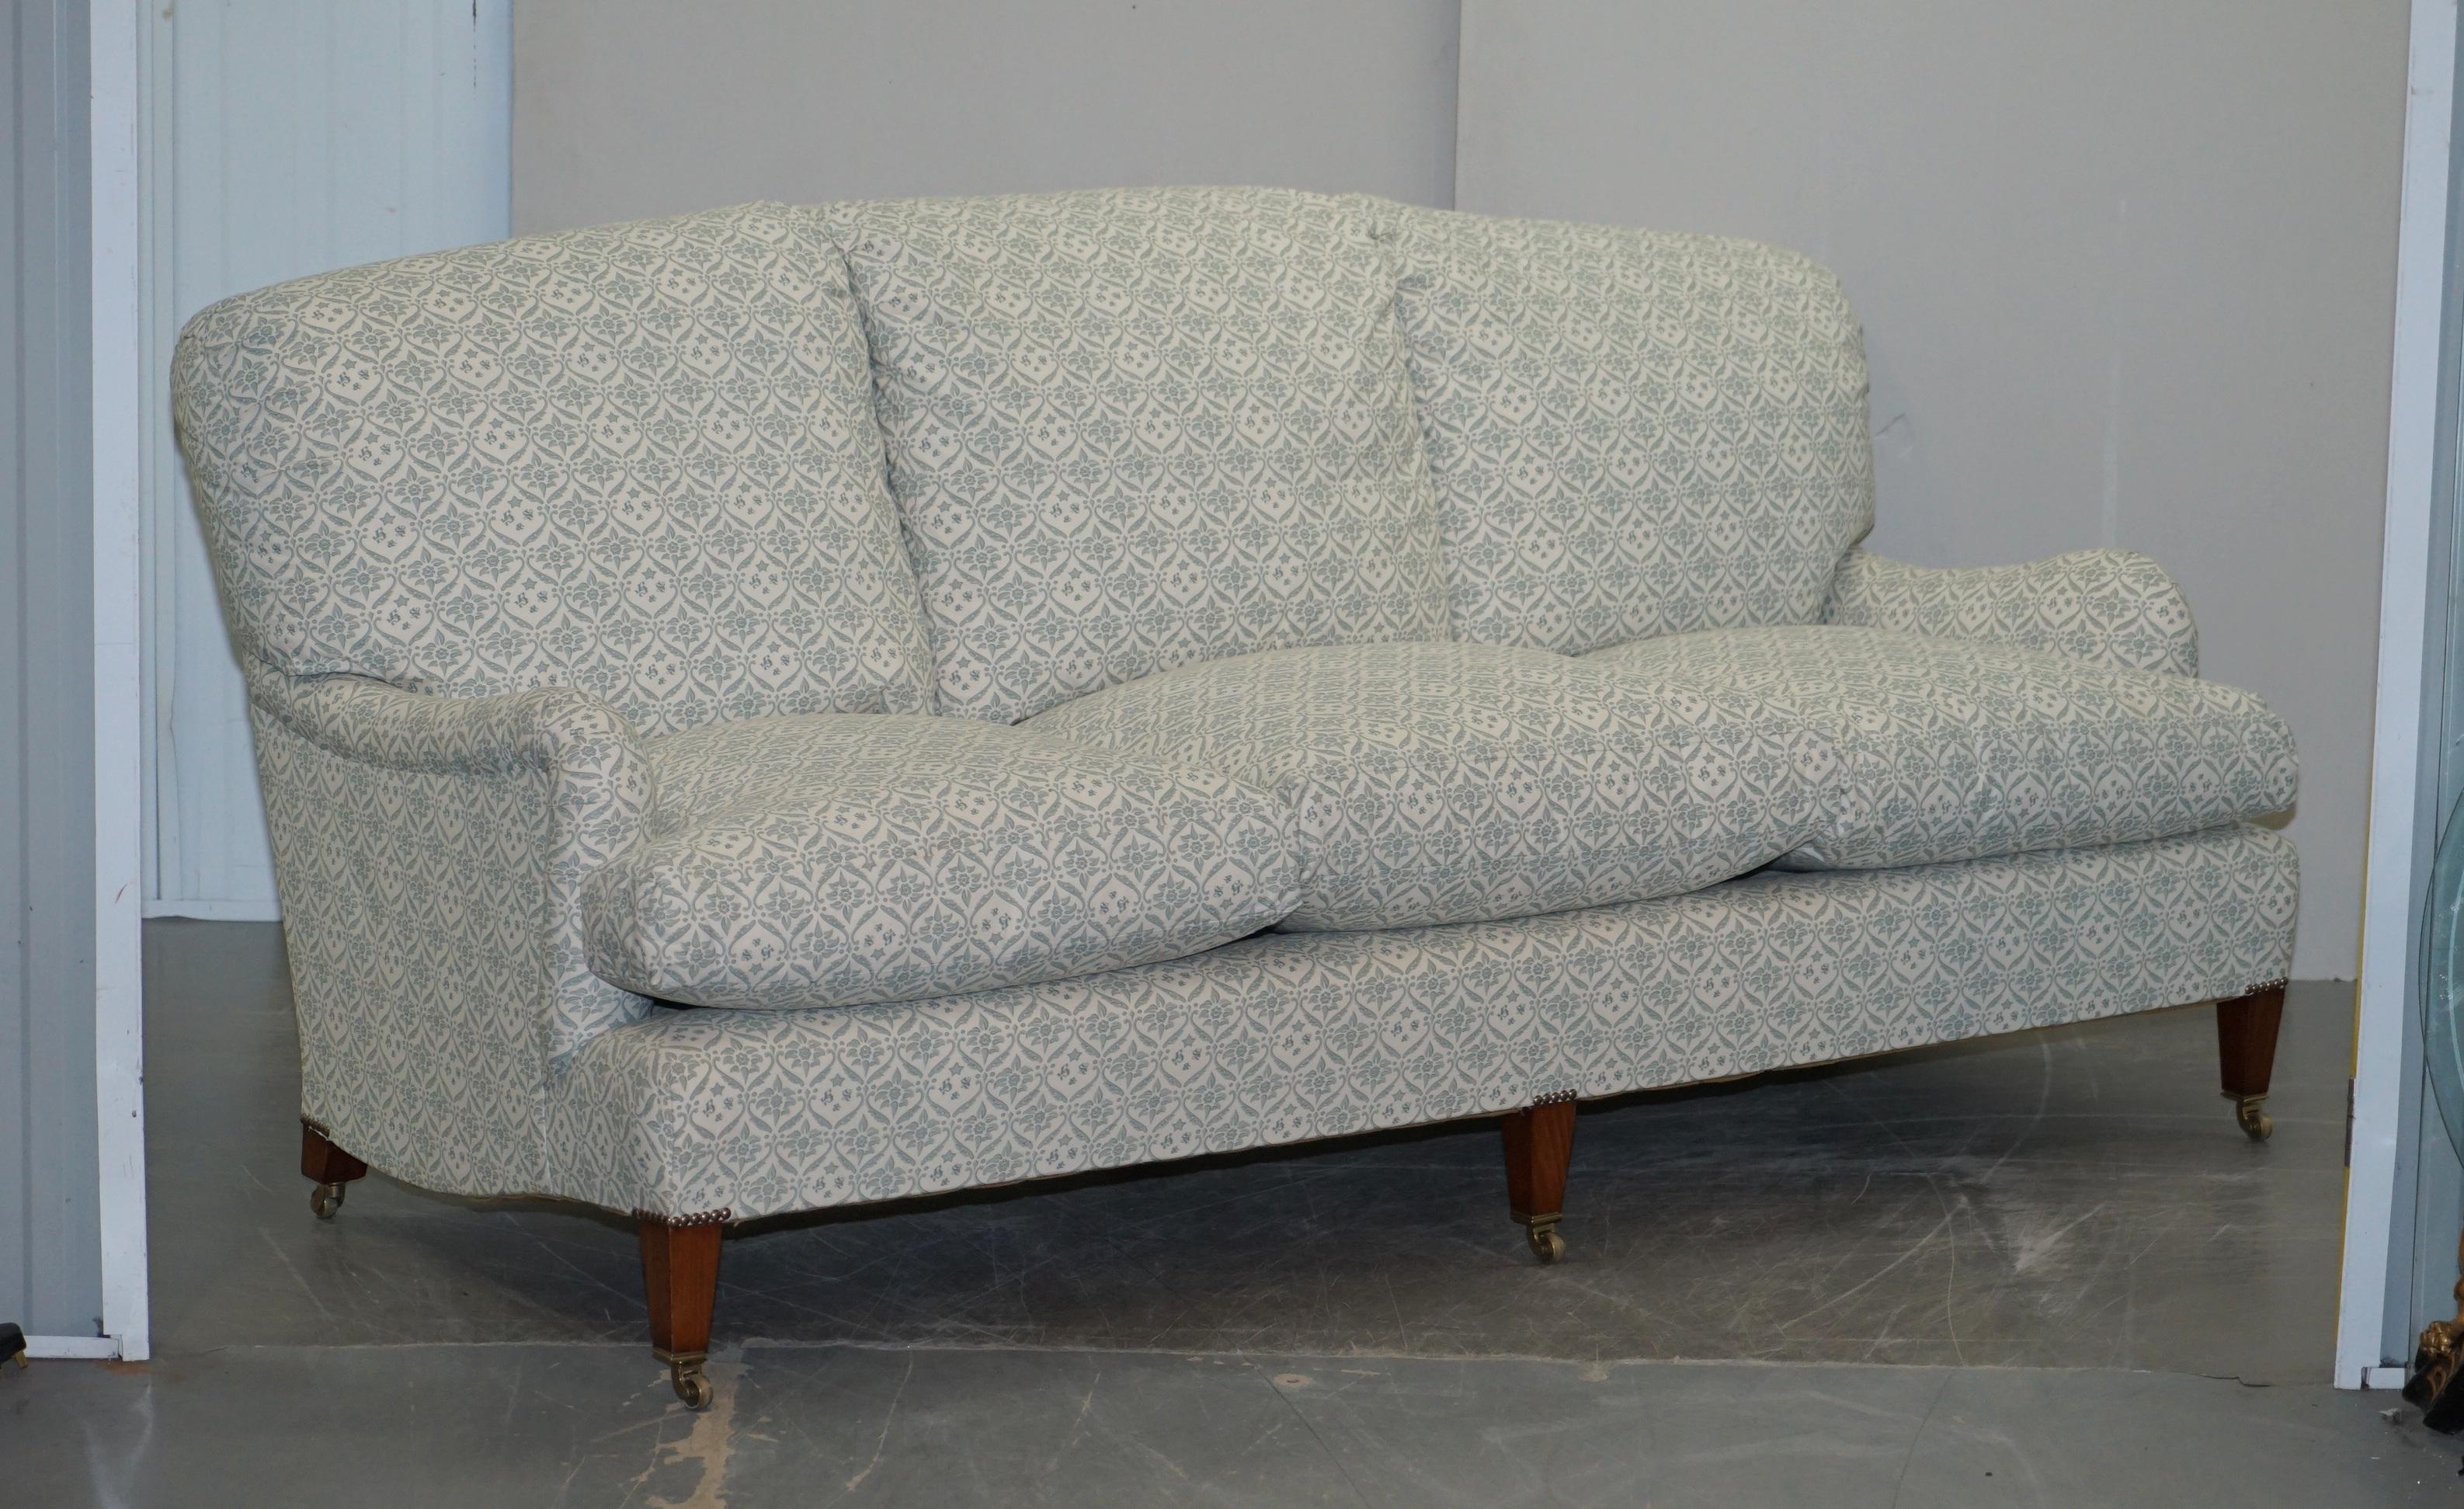 We are delighted to offer for sale 1 of 2 stunning exceptionally rare original Howard & Son’s sofas with the original ticking fabric 

This has to be the most comfortable sofa I have ever sat on, the back rest is fibre filled so its like a seat